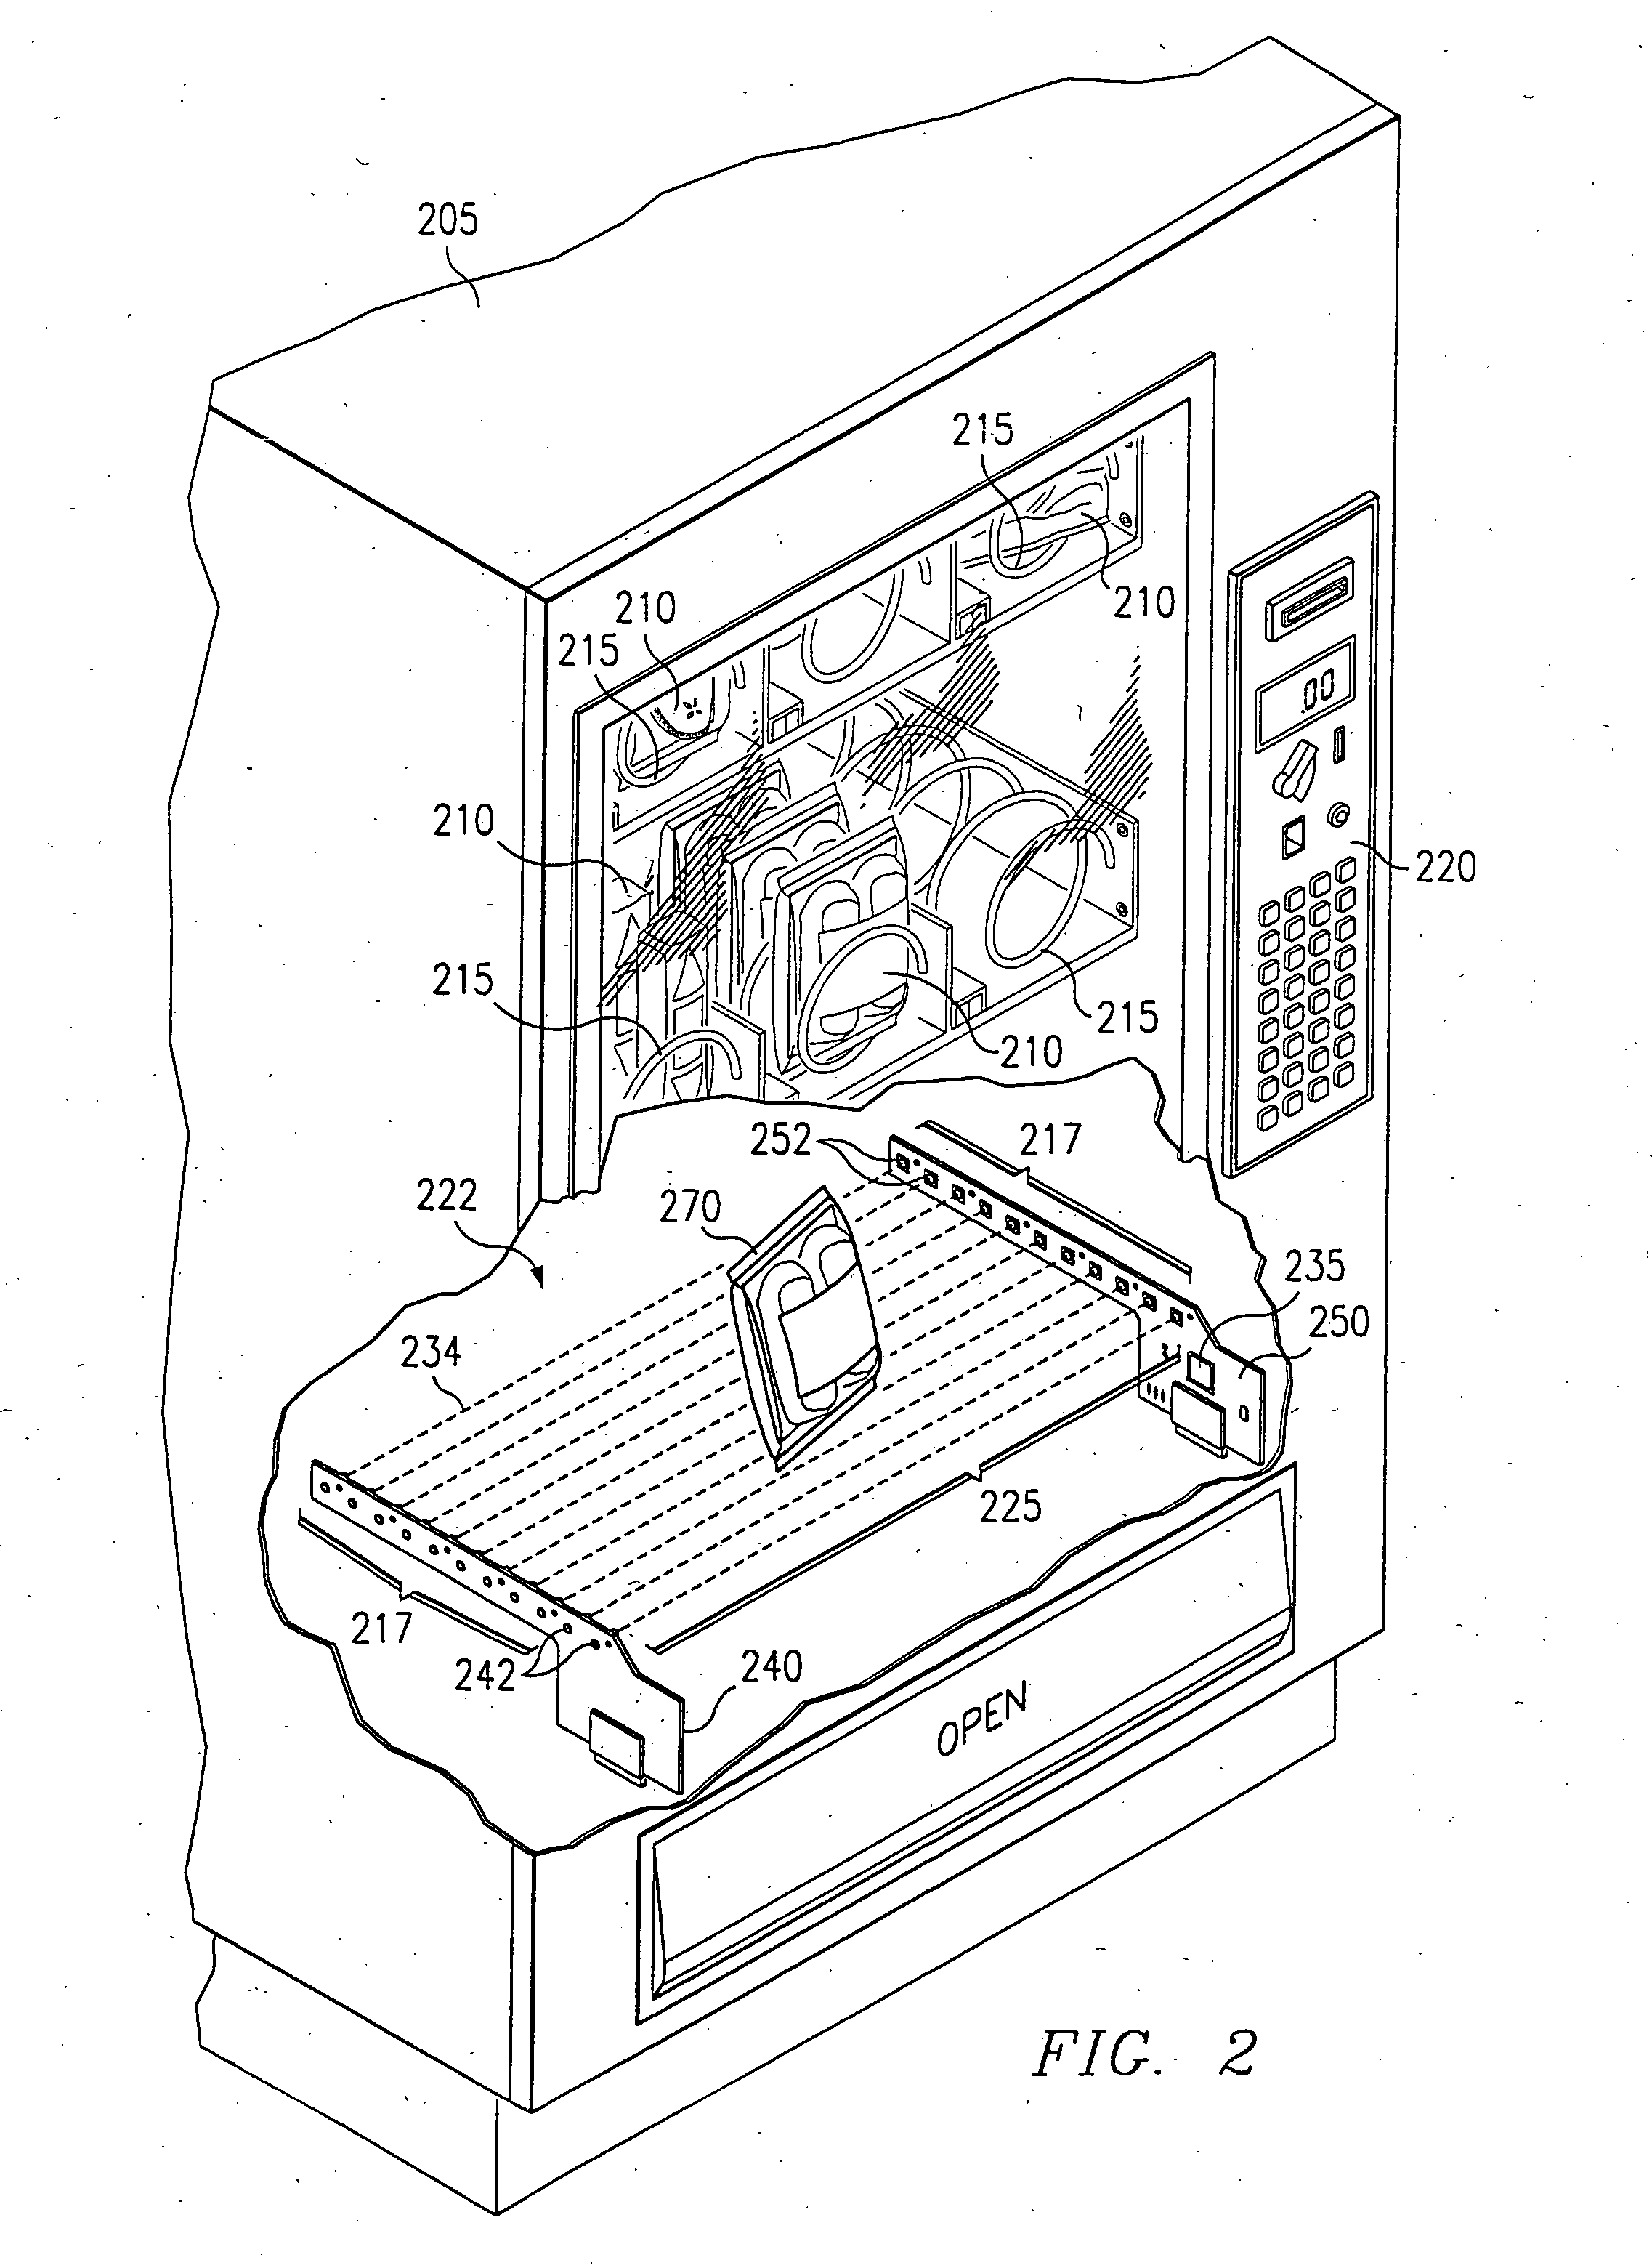 Optical vend sensing system for product delivery detection